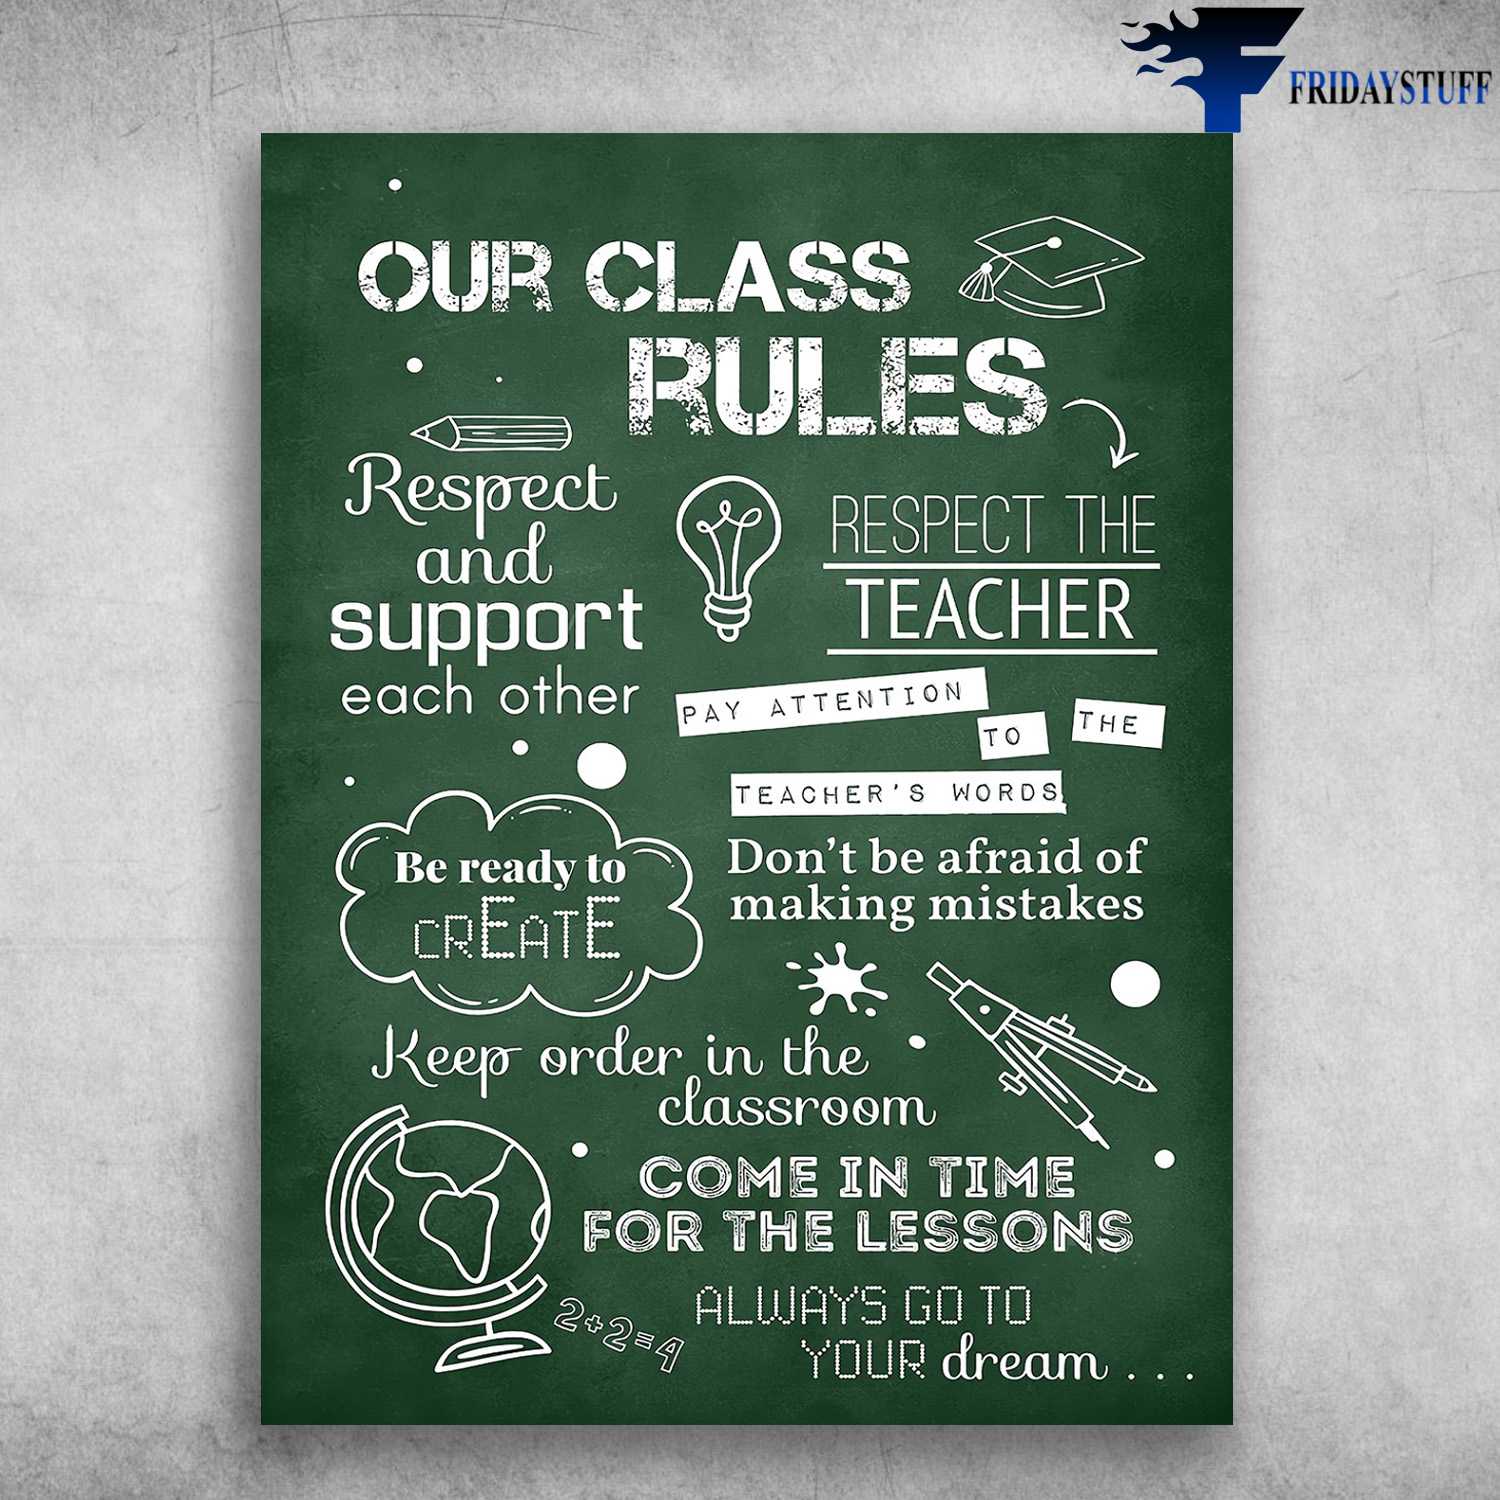 Classroom Poster - Our Class Rules, Respect And Support Each Other, Respect The Teacher, Pay Attention To The Teacher's Words